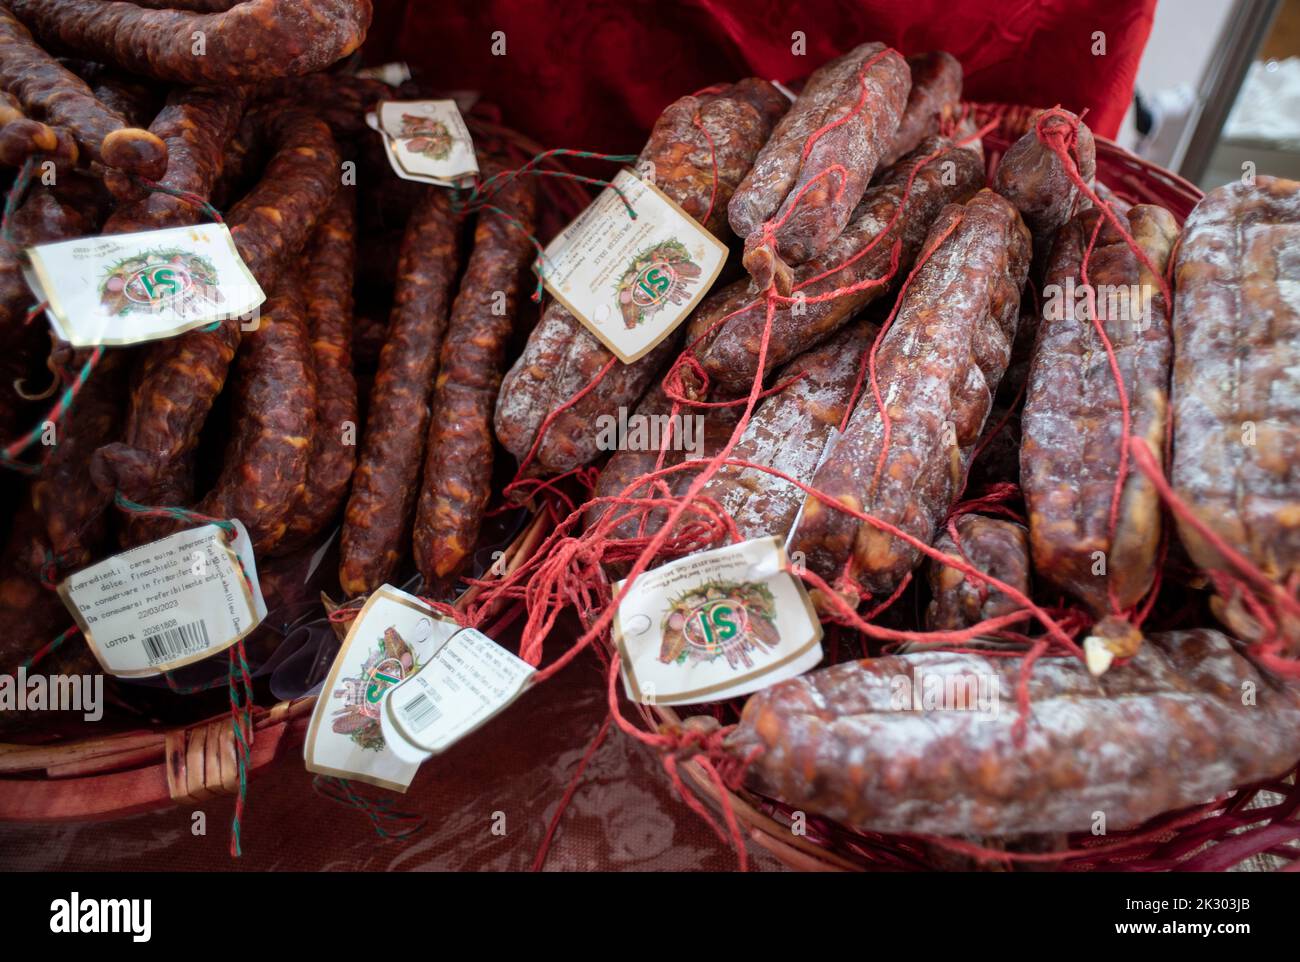 Italie. 23rd septembre 2022. Italie Turin Parco Dora 'Terra Madre - Salone del Gusto 2022' - Calabria Sausage Credit: Realy Easy Star/Alamony Live News Banque D'Images